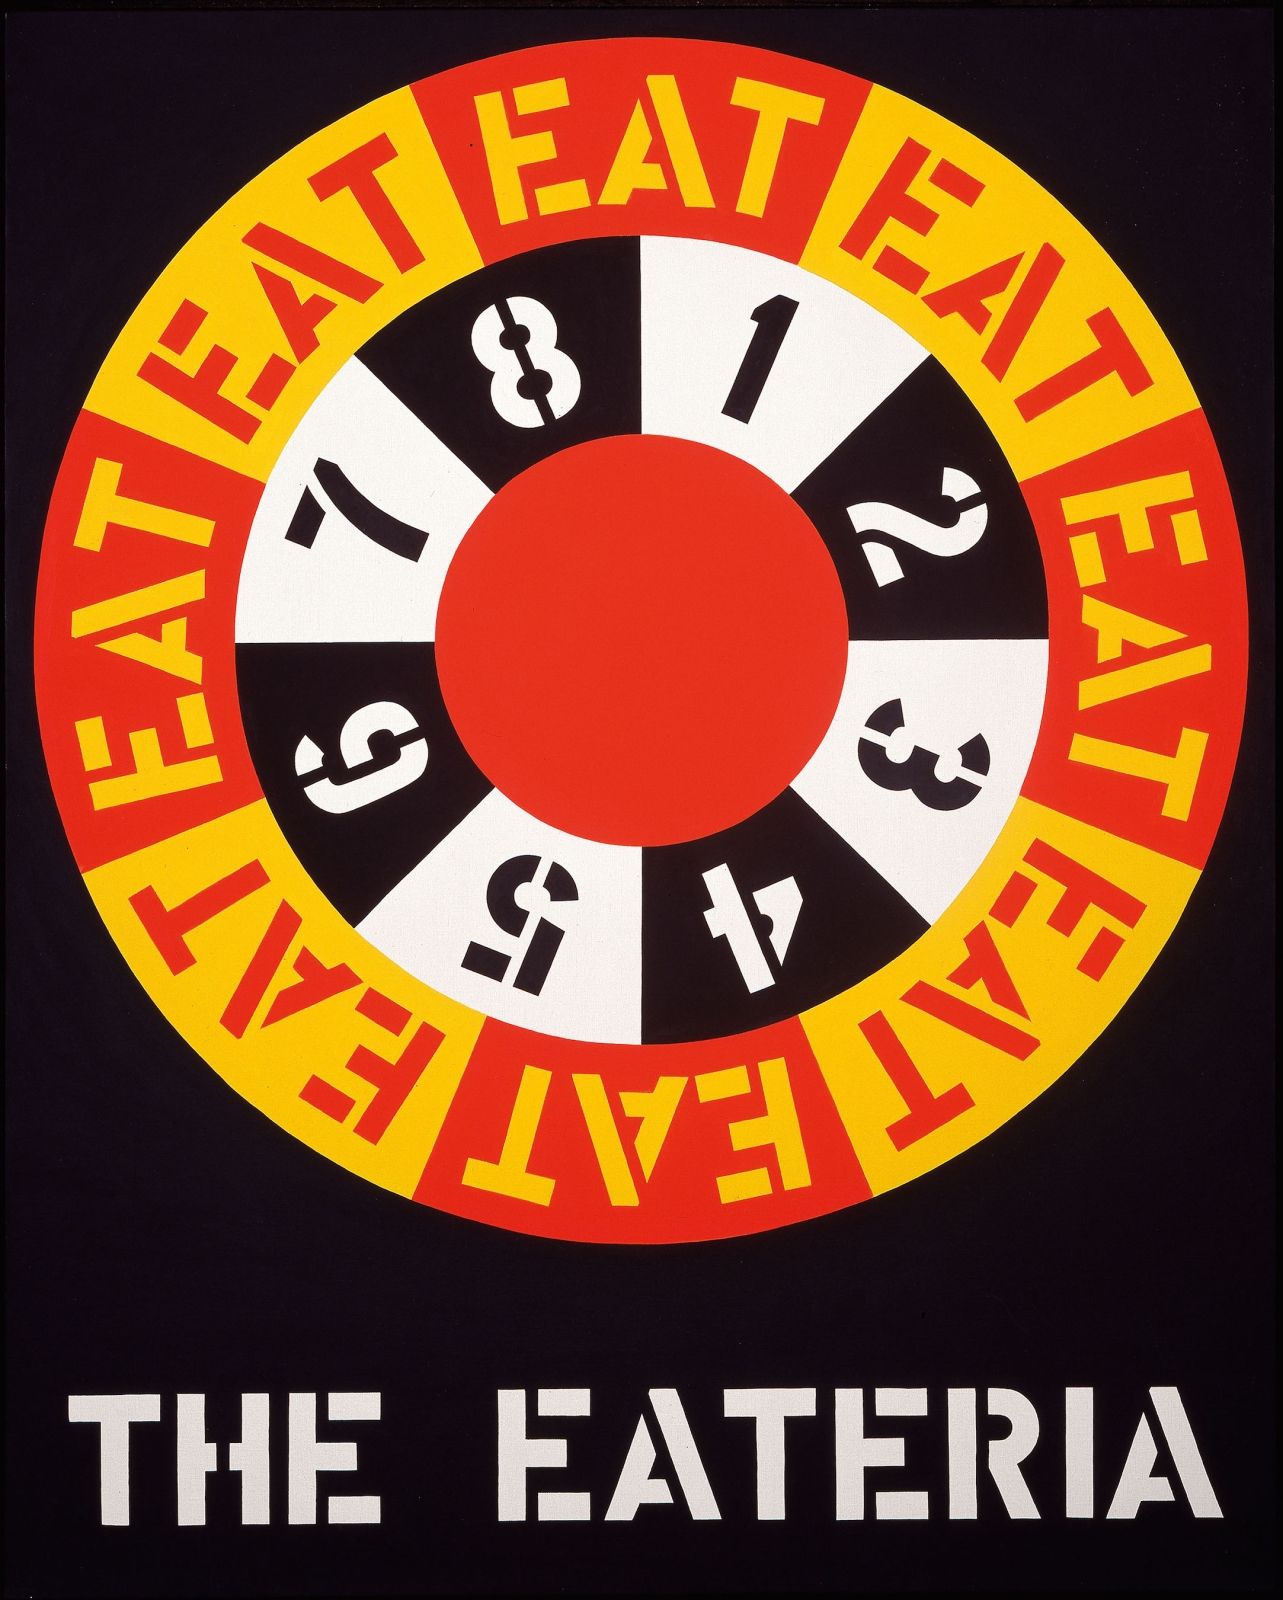 The Eateria, 1962.&nbsp;Photo: Courtesy of the Hirshhorn Museum and Sculpture Garden, Smithsonian Institution, Washington, D.C.; Artwork: &copy; Morgan Art Foundation Ltd./Artists Rights Society (ARS), NY